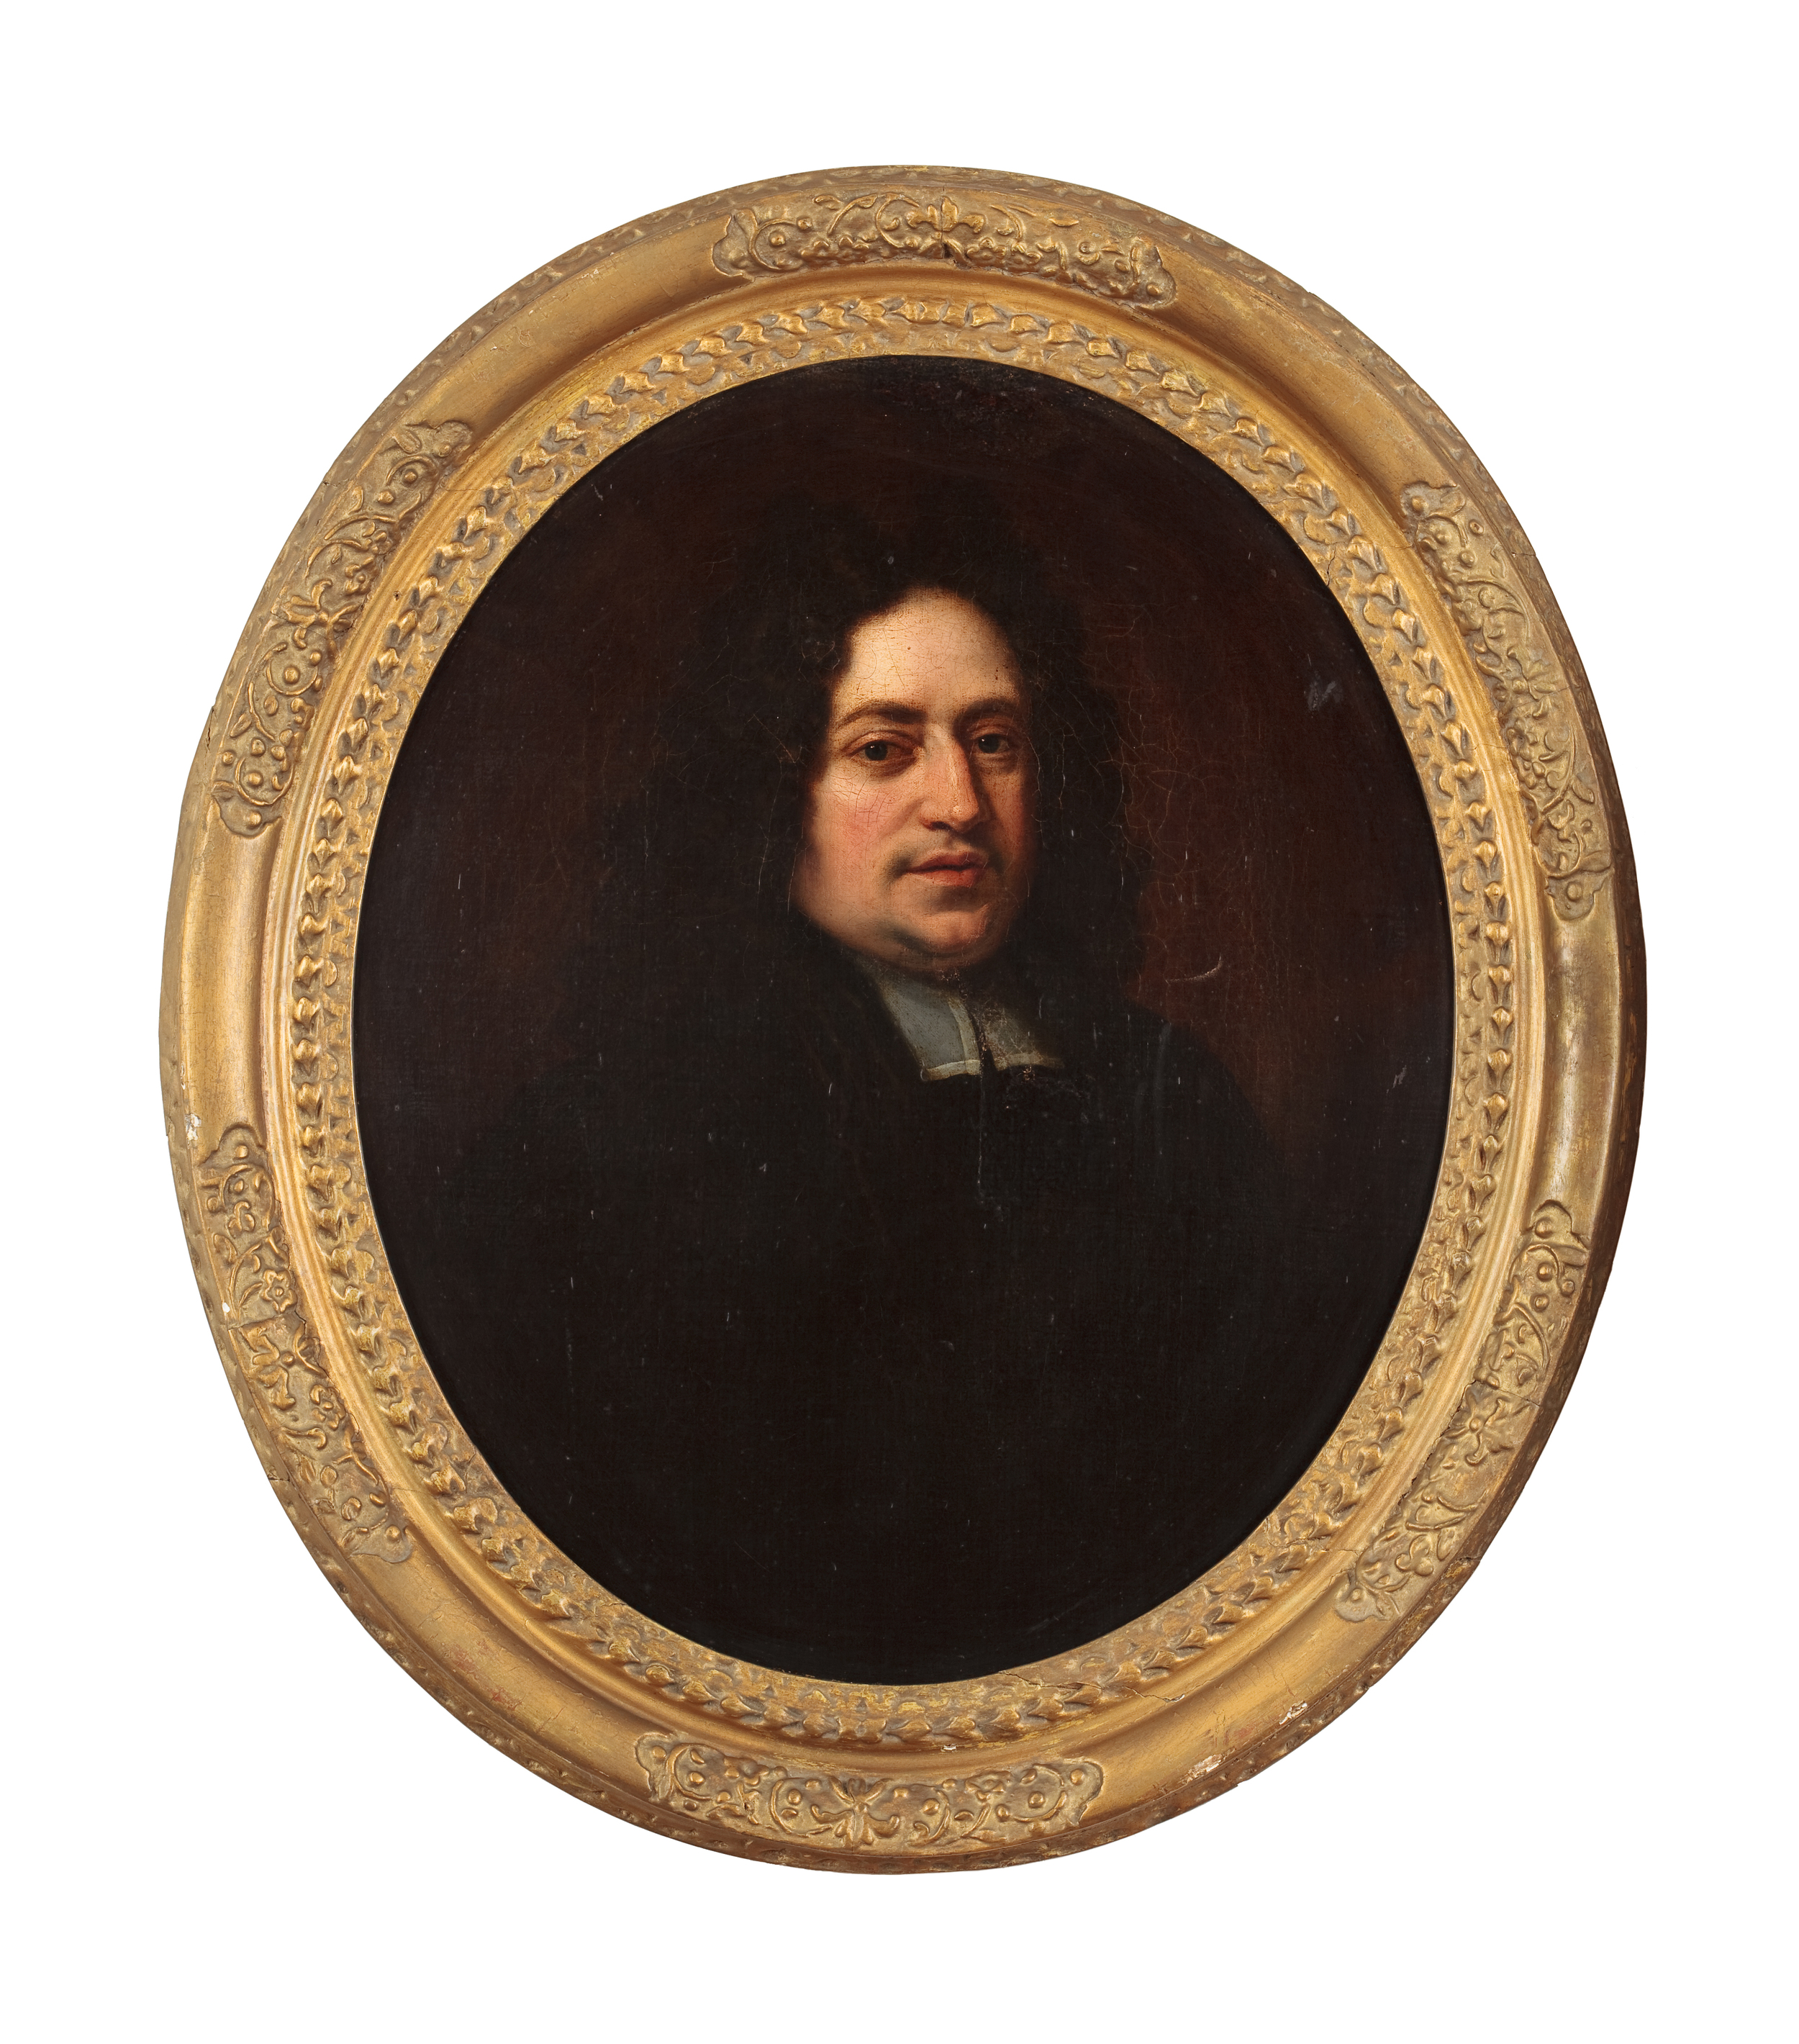 Copy of artwork and frame, "Pastor Ruperti" from Hogarth House Collection.